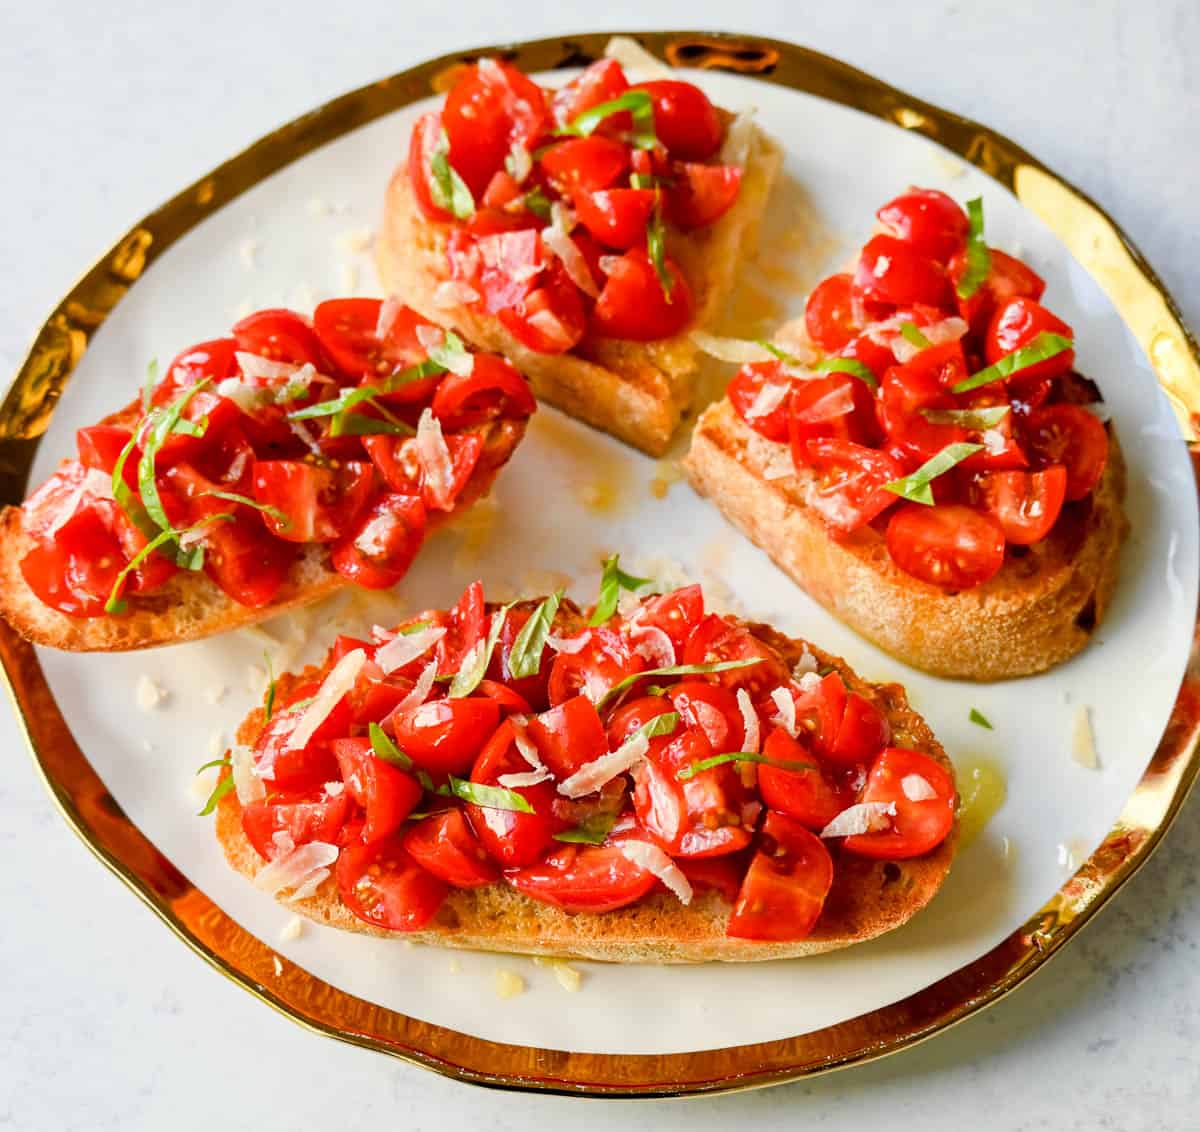 How to make bruschetta with all of the bruschetta topping ideas and bruschetta combinations. Bruschetta is the perfect party appetizer and party food!